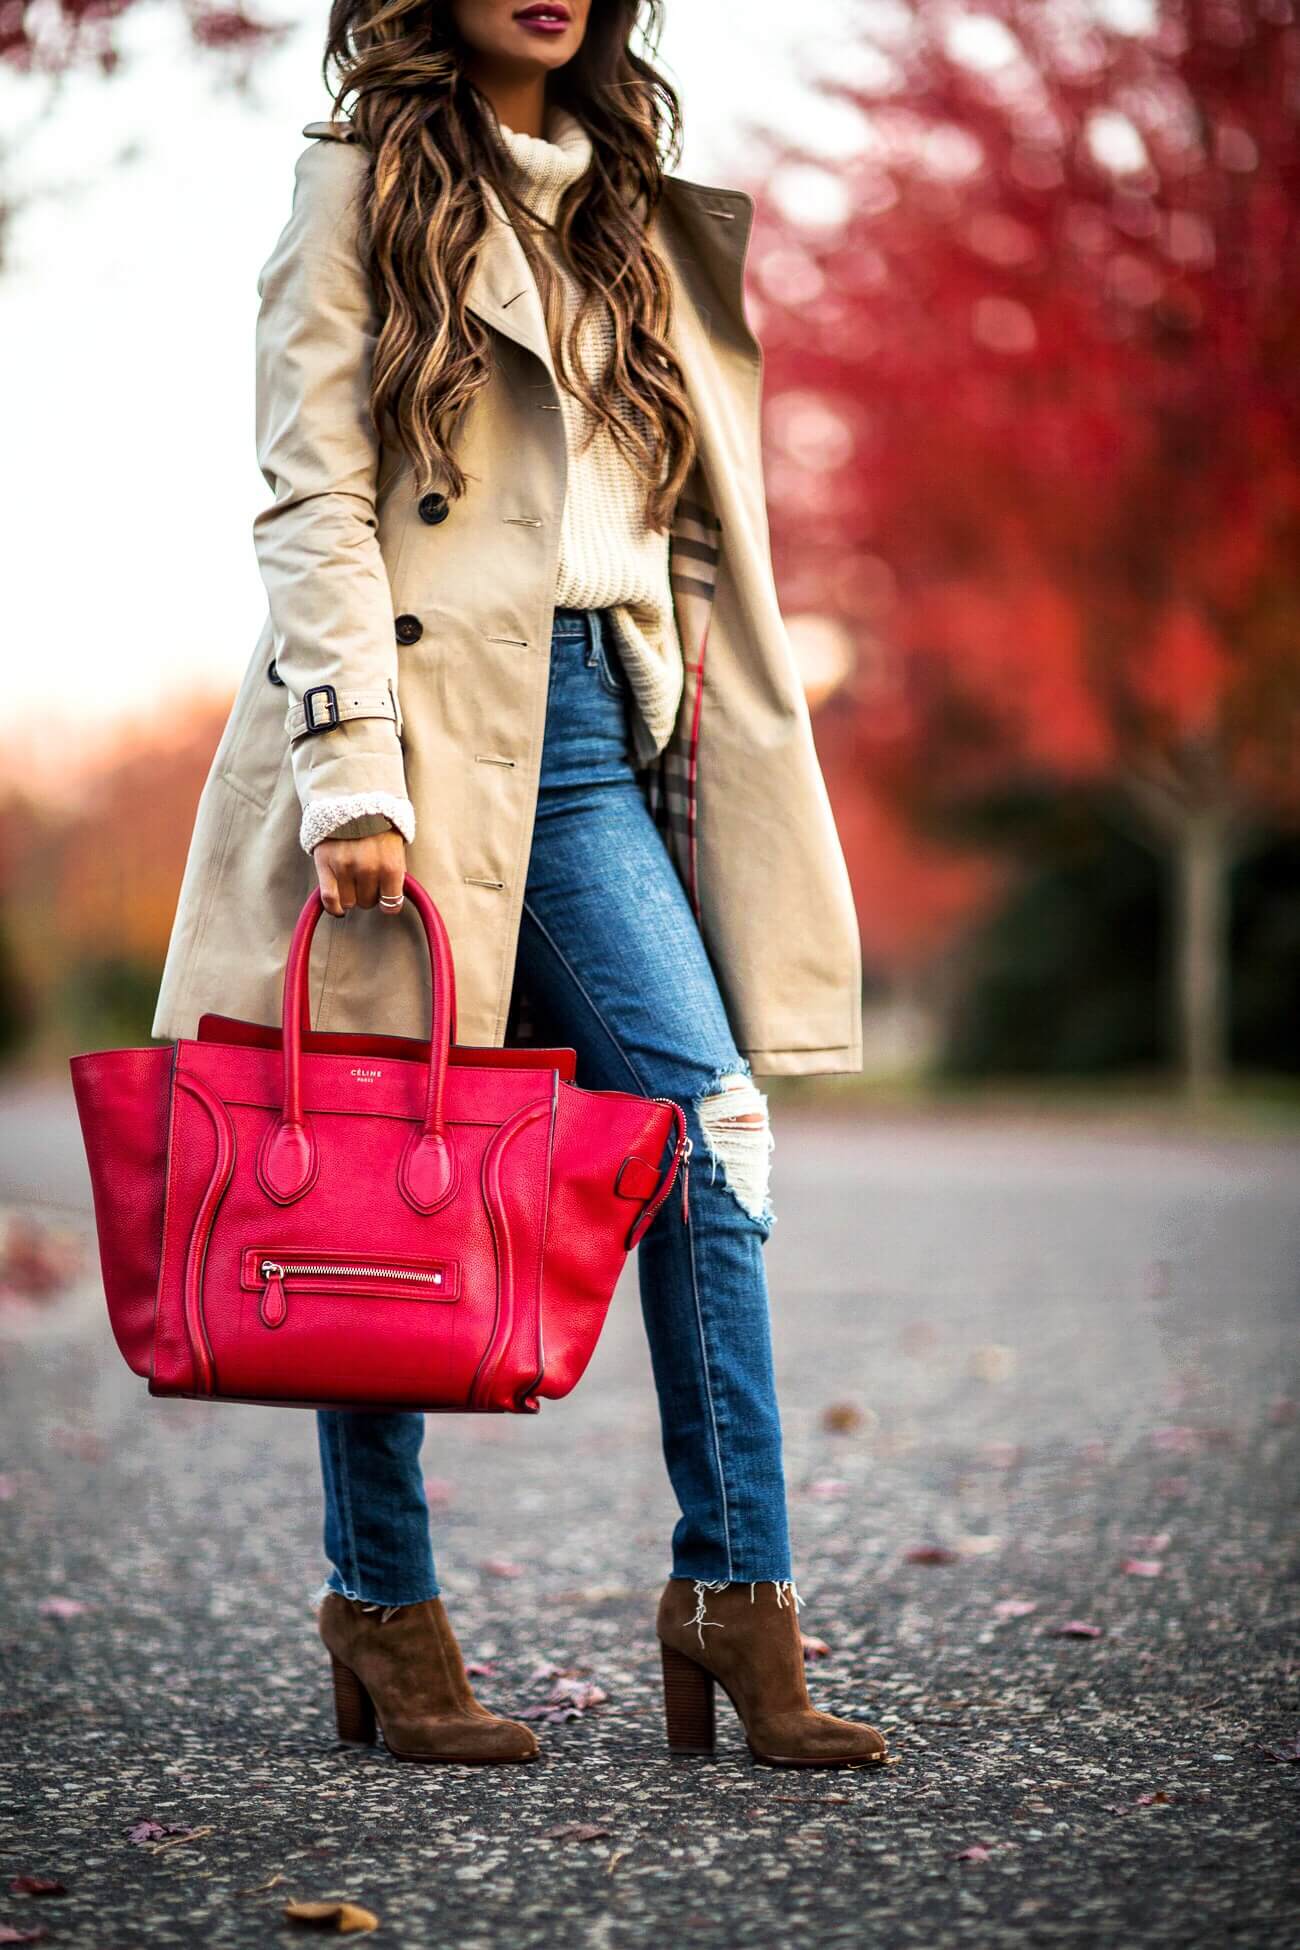 fashion blogger mia mia mine wearing a red celine bag and alexander wang booties